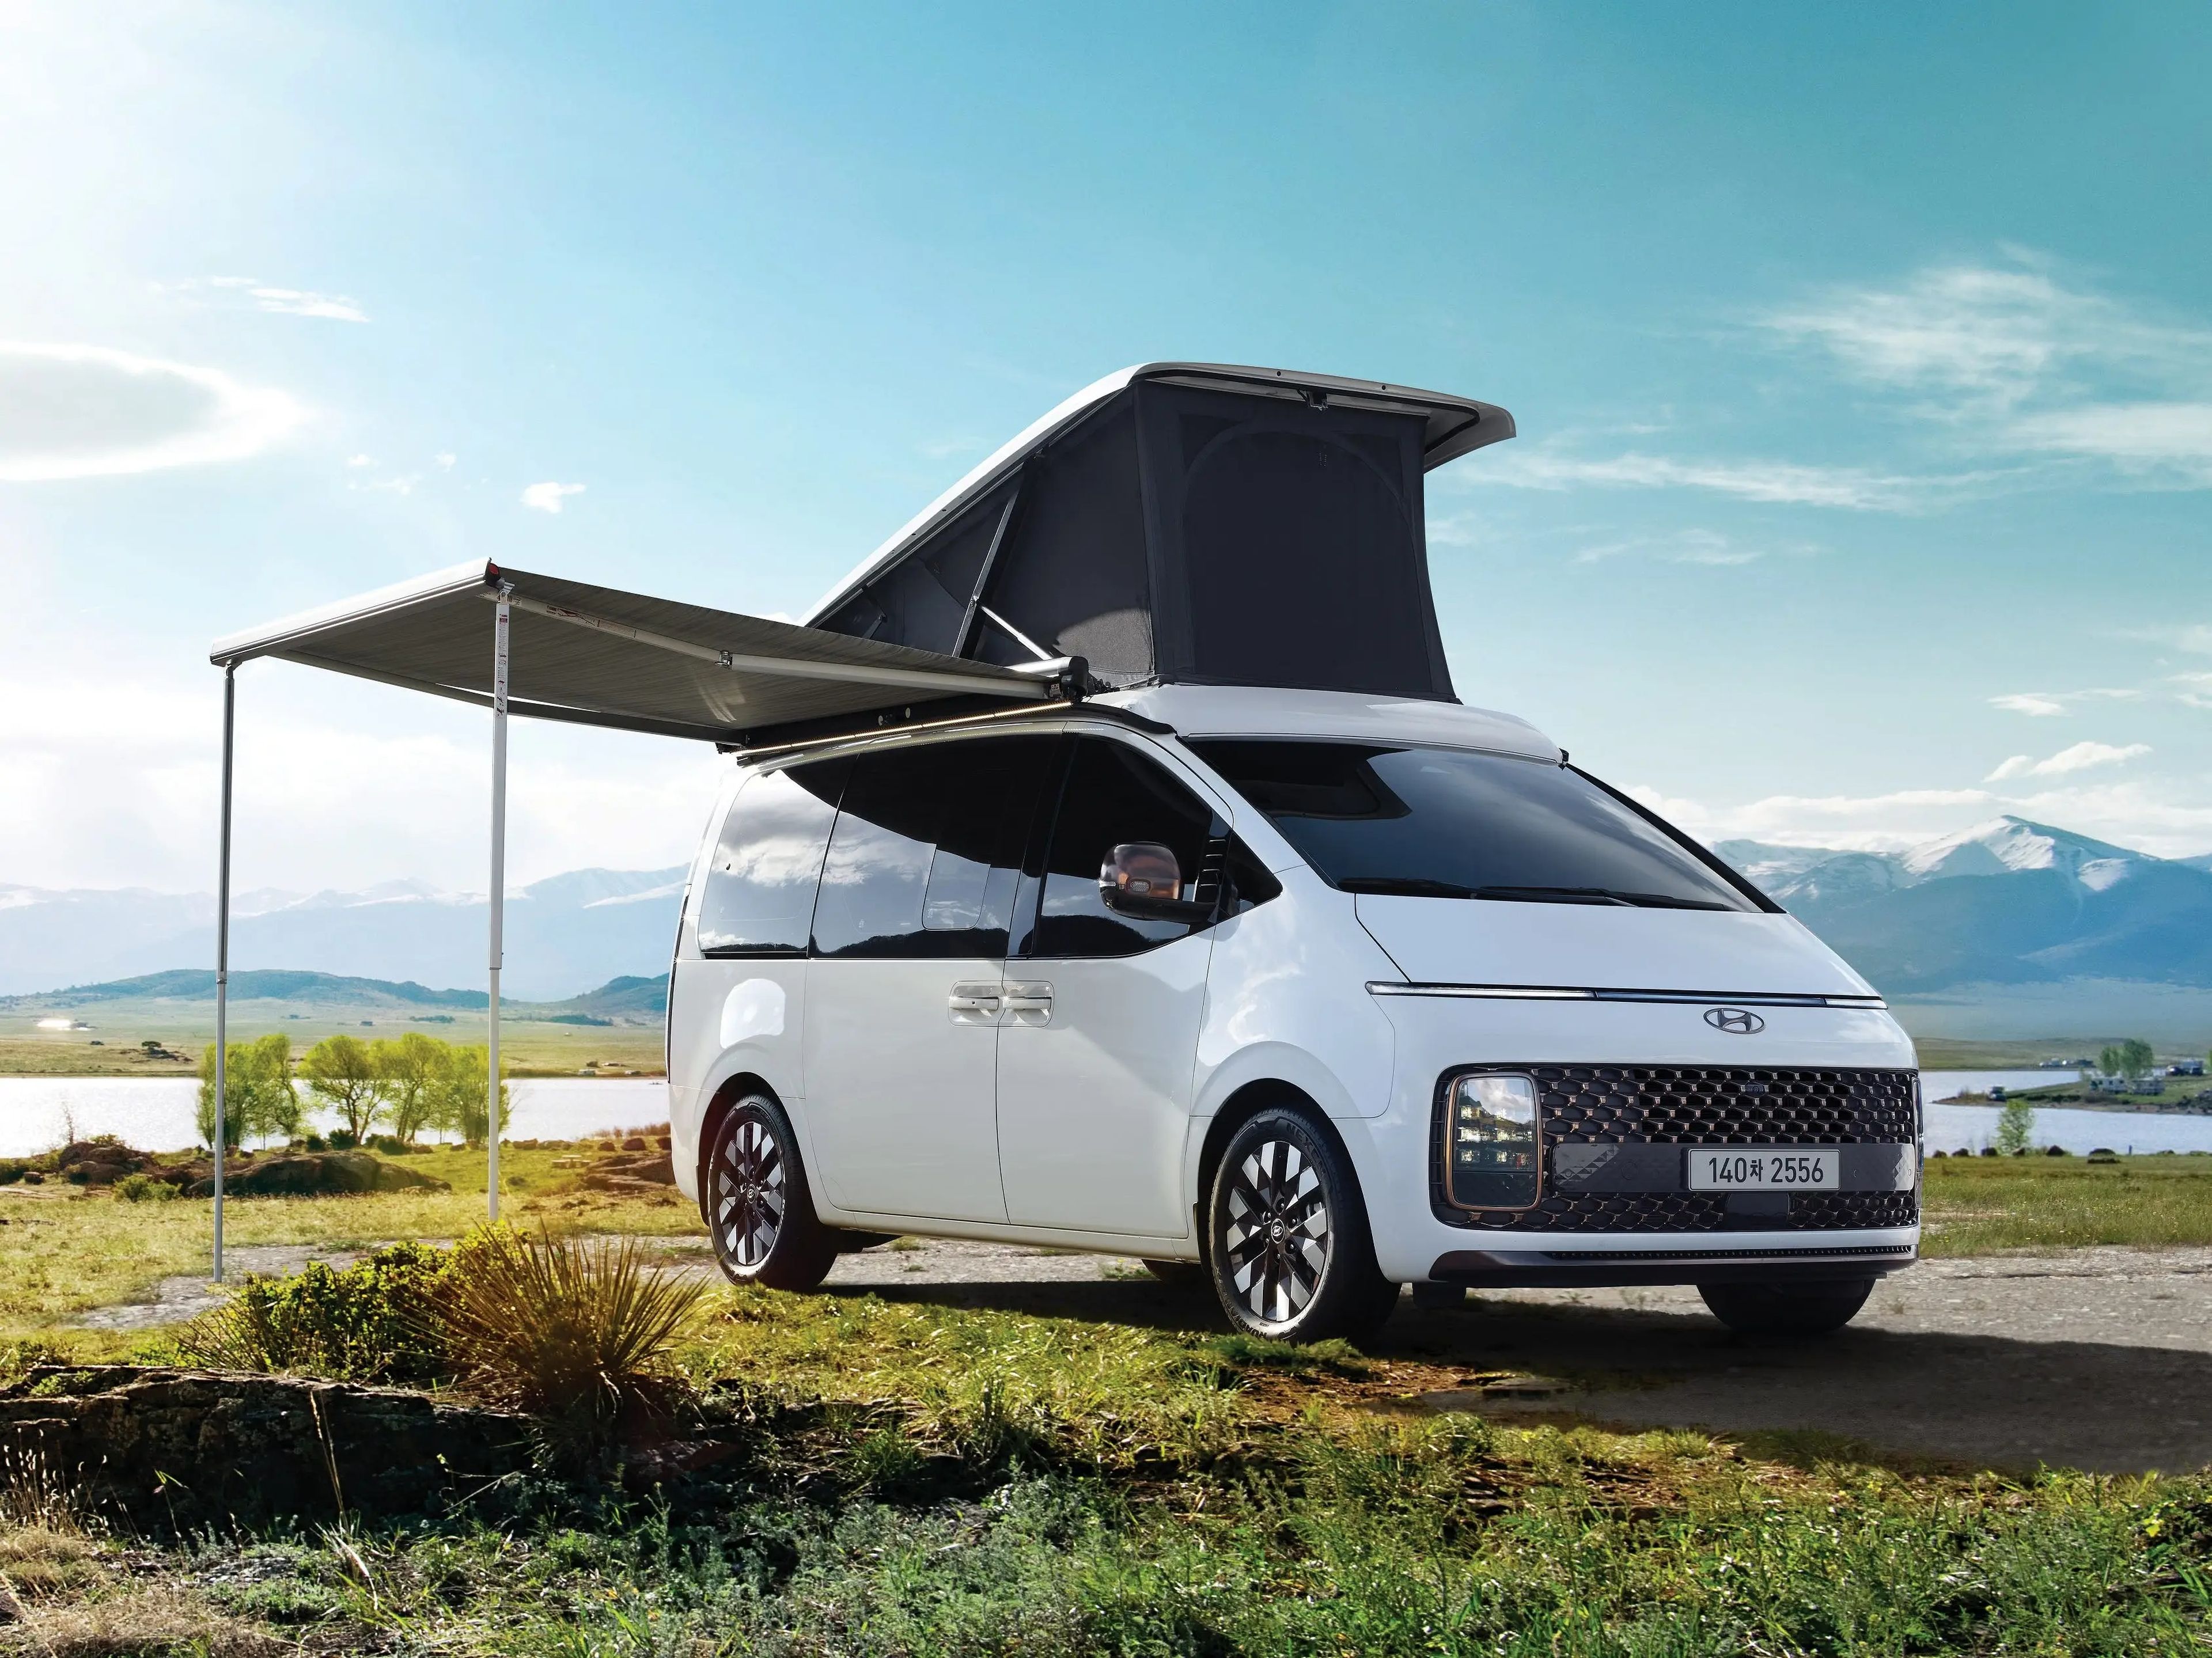 The Hyundai Staria Lounge Camper parked outside with the pop topped and awning extended.